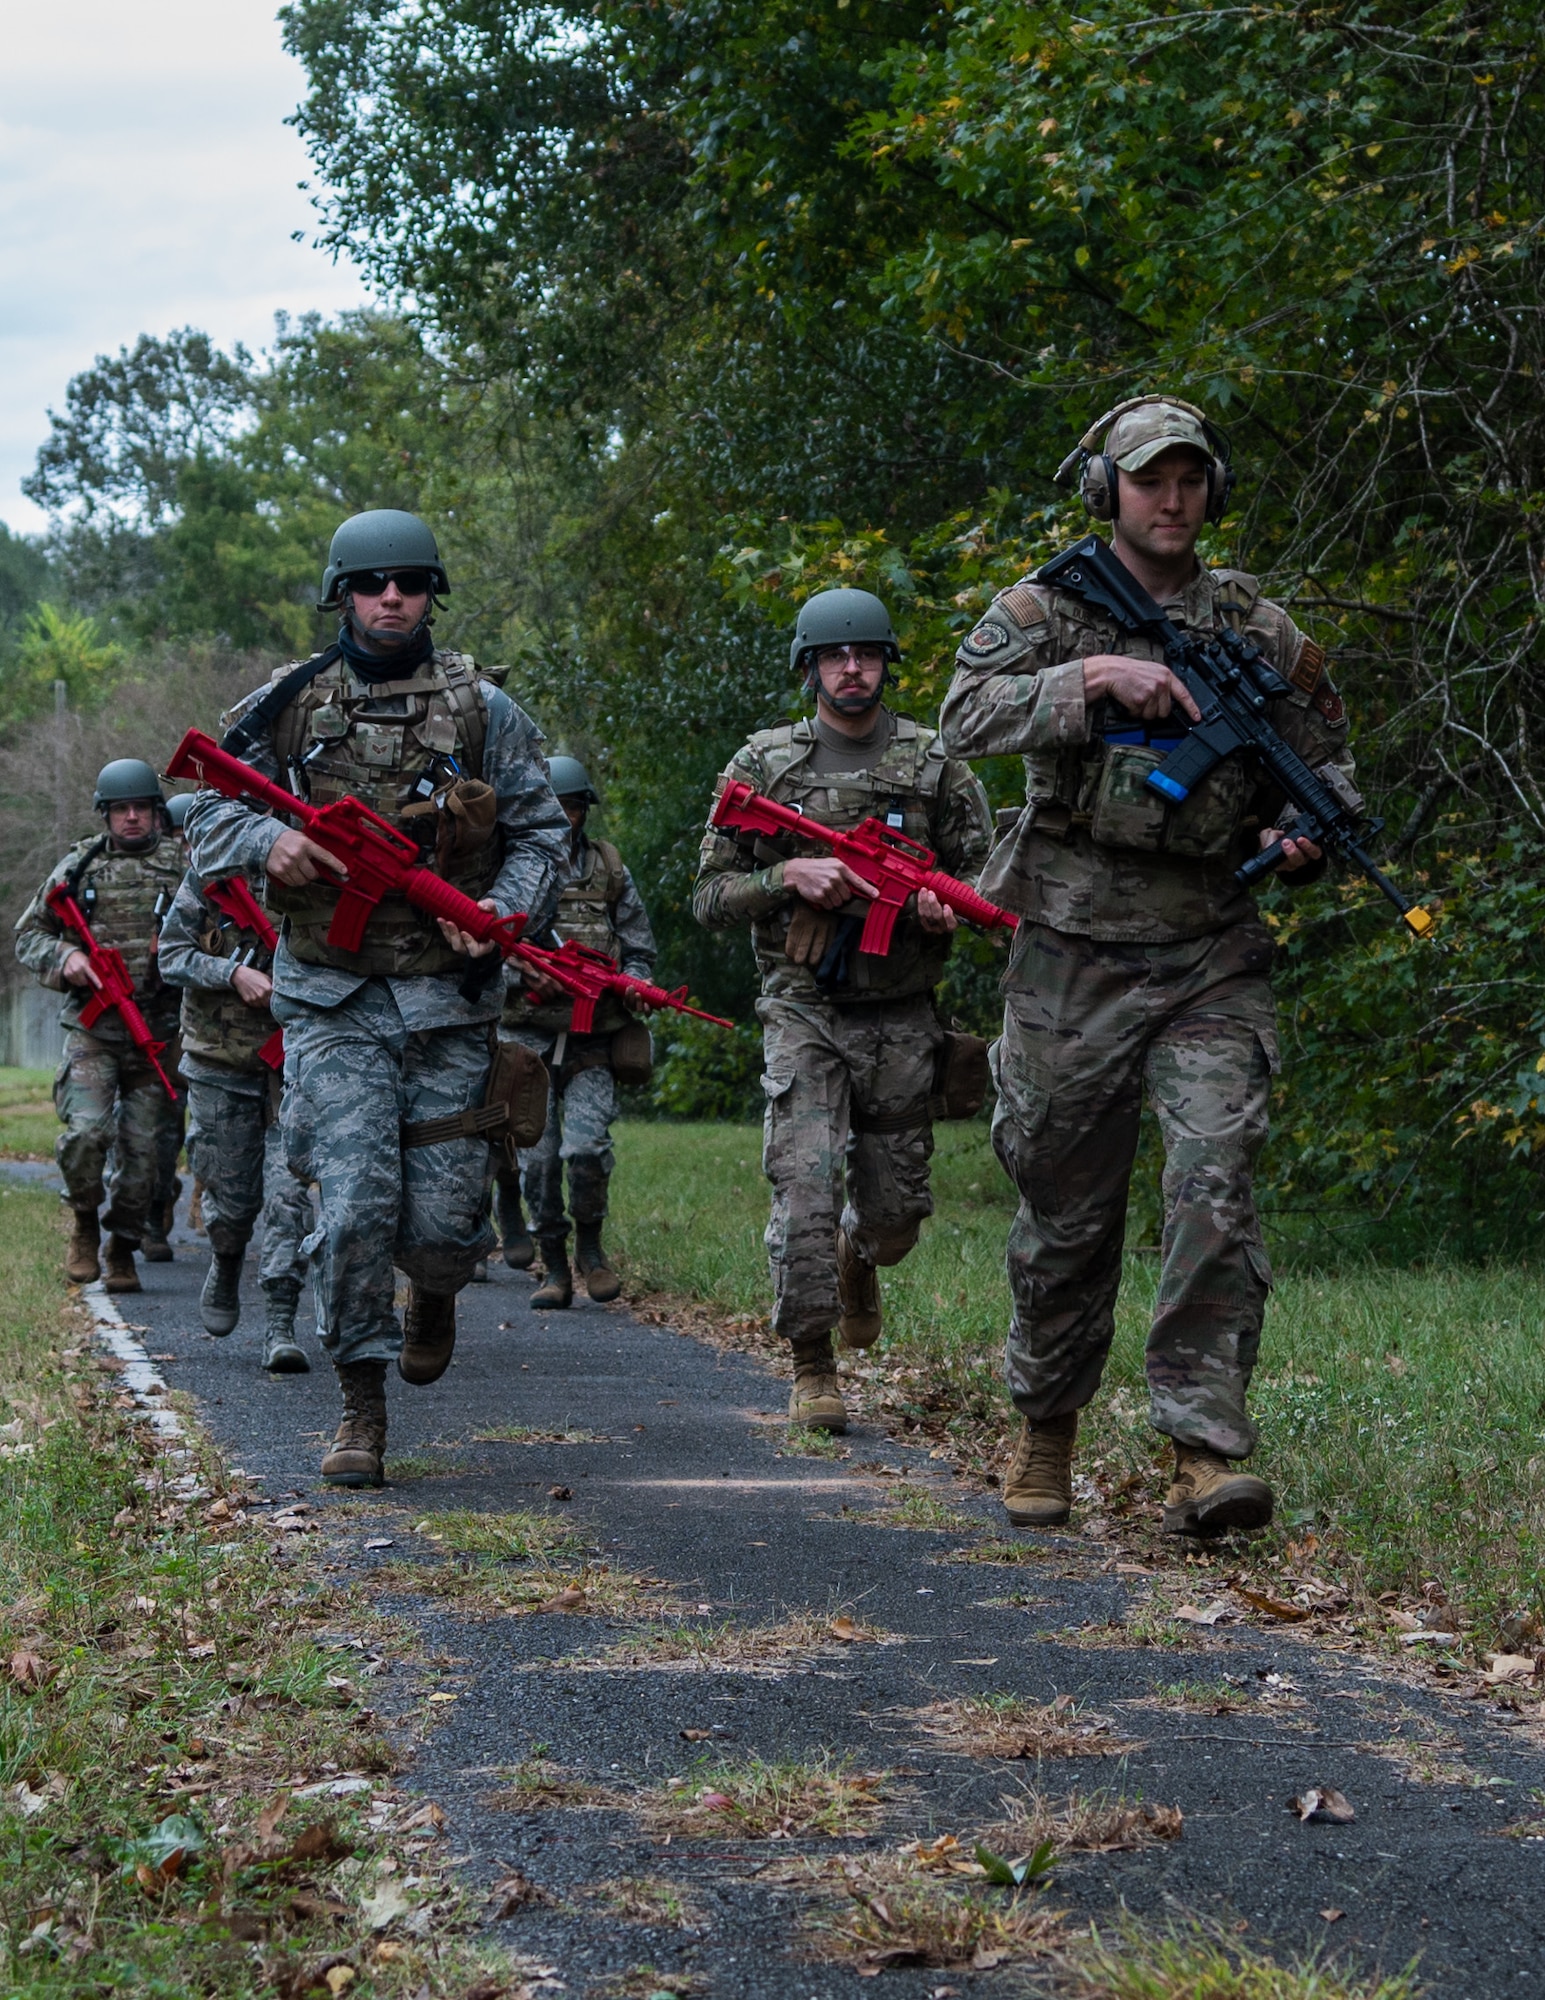 Exercises like these ensure the readiness and capability of Air Force personnel.